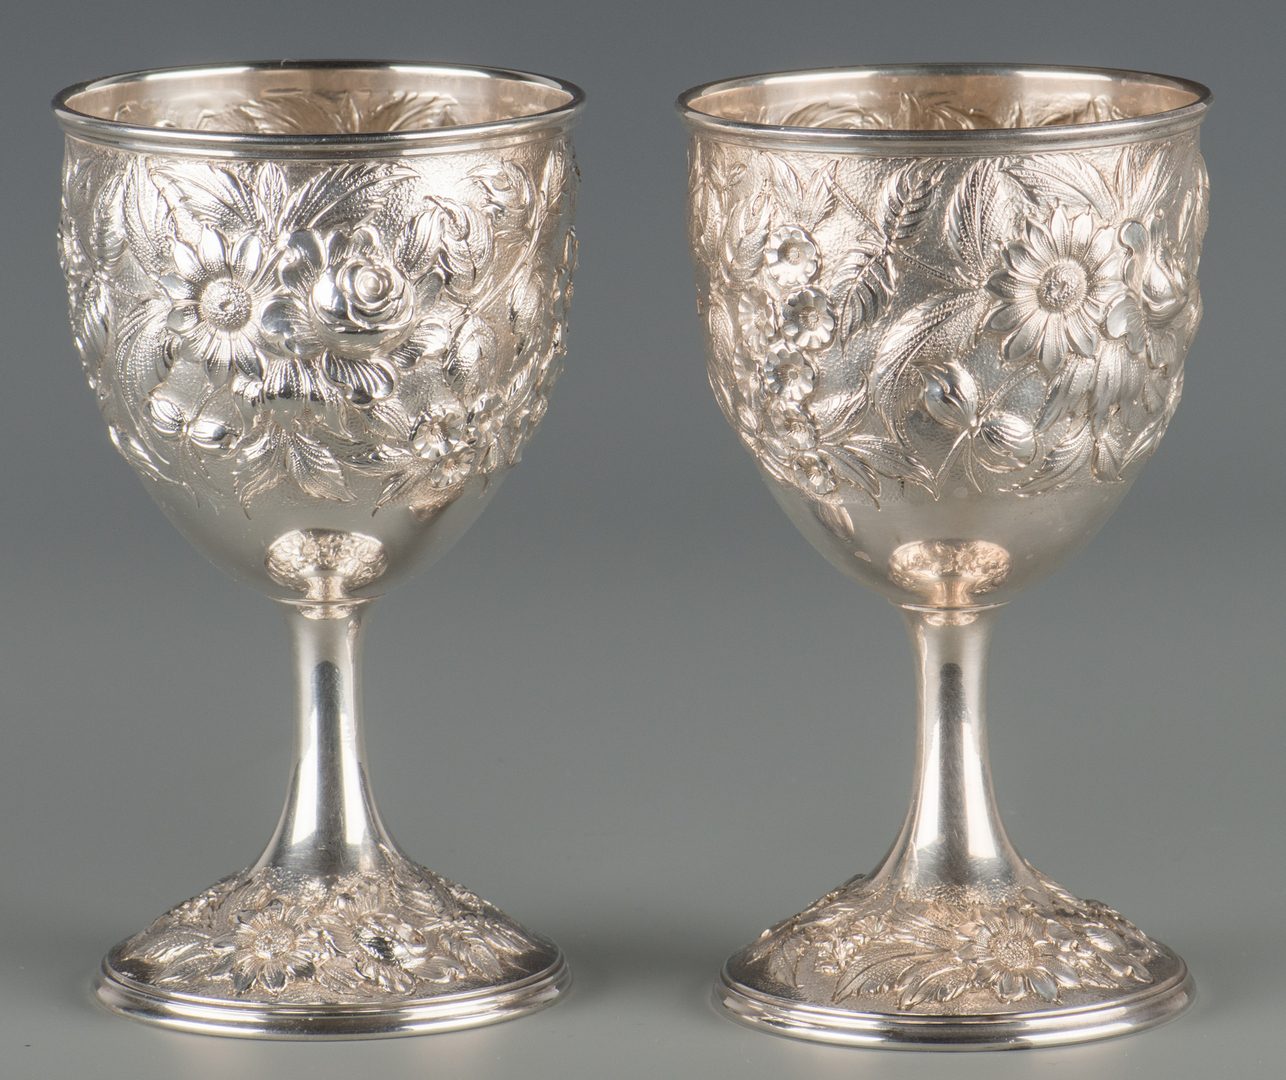 Lot 72: 10 Kirk Repousse Sterling Goblets